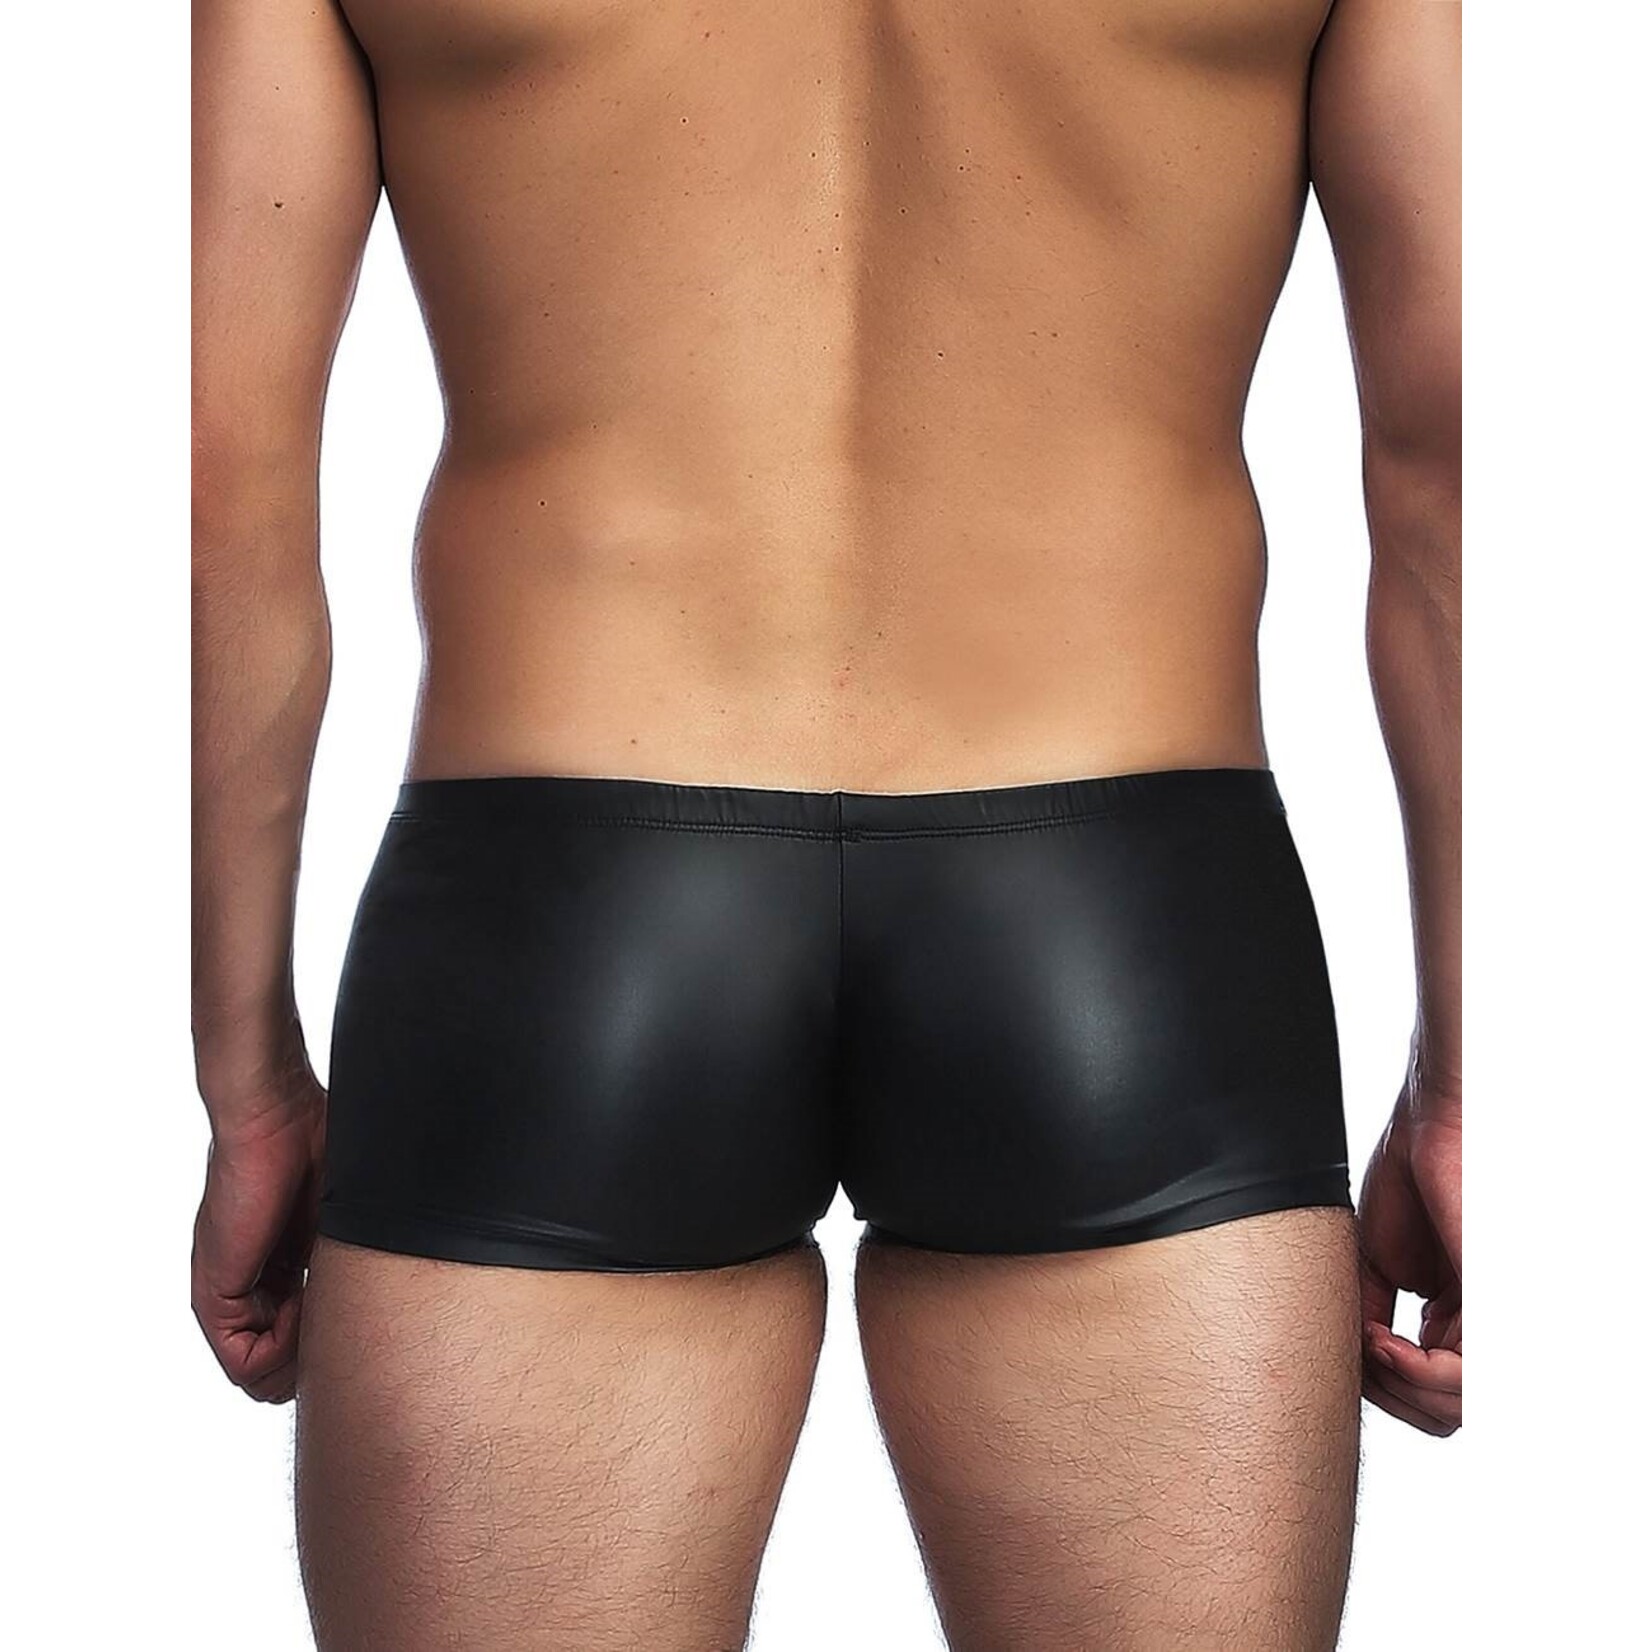 OH YEAH! -  BLACK LEATHER SEXY PANTY FOR MAN 2XL